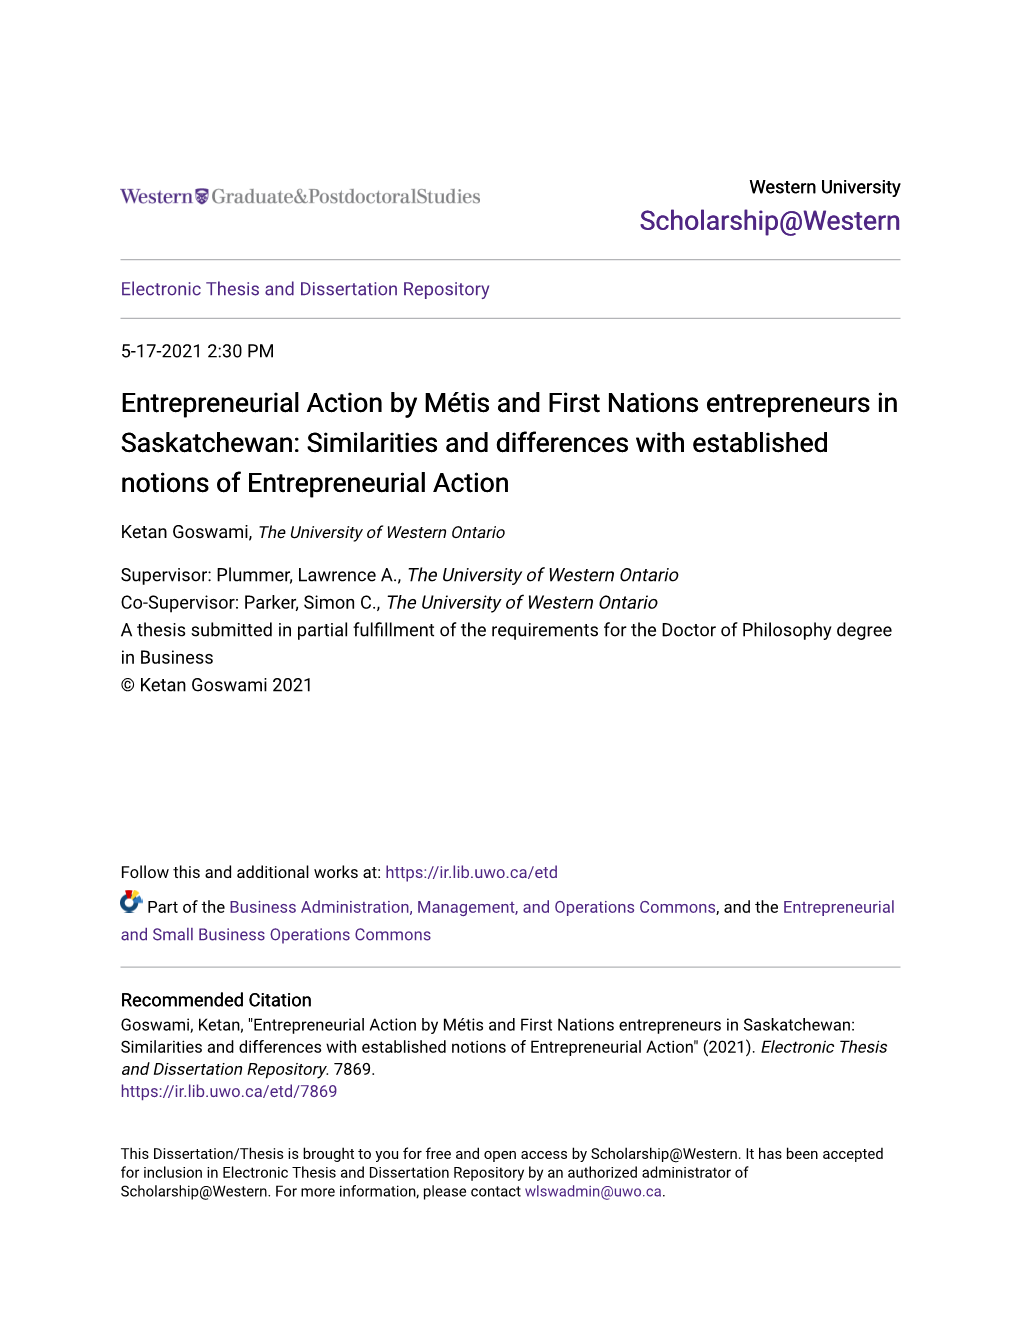 Entrepreneurial Action by Métis and First Nations Entrepreneurs in Saskatchewan: Similarities and Differences with Established Notions of Entrepreneurial Action